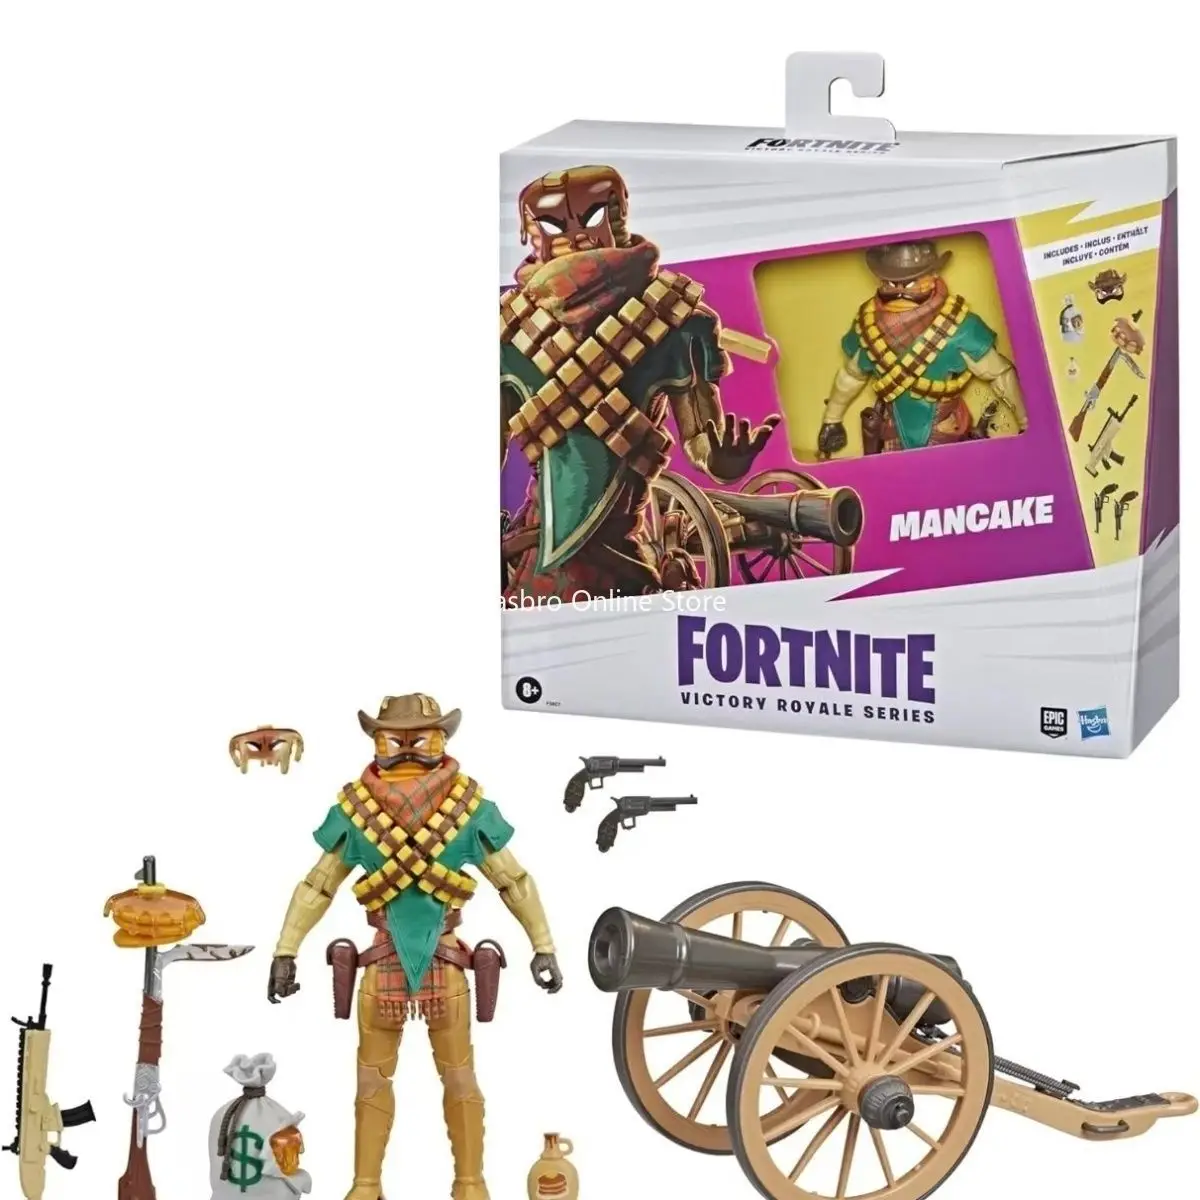 

Hasbro FORTNITE Victory Royale Series Mancake 6-inch Deluxe Pack Collectible Action Figure with Accessories Ages 8 and Up F5807